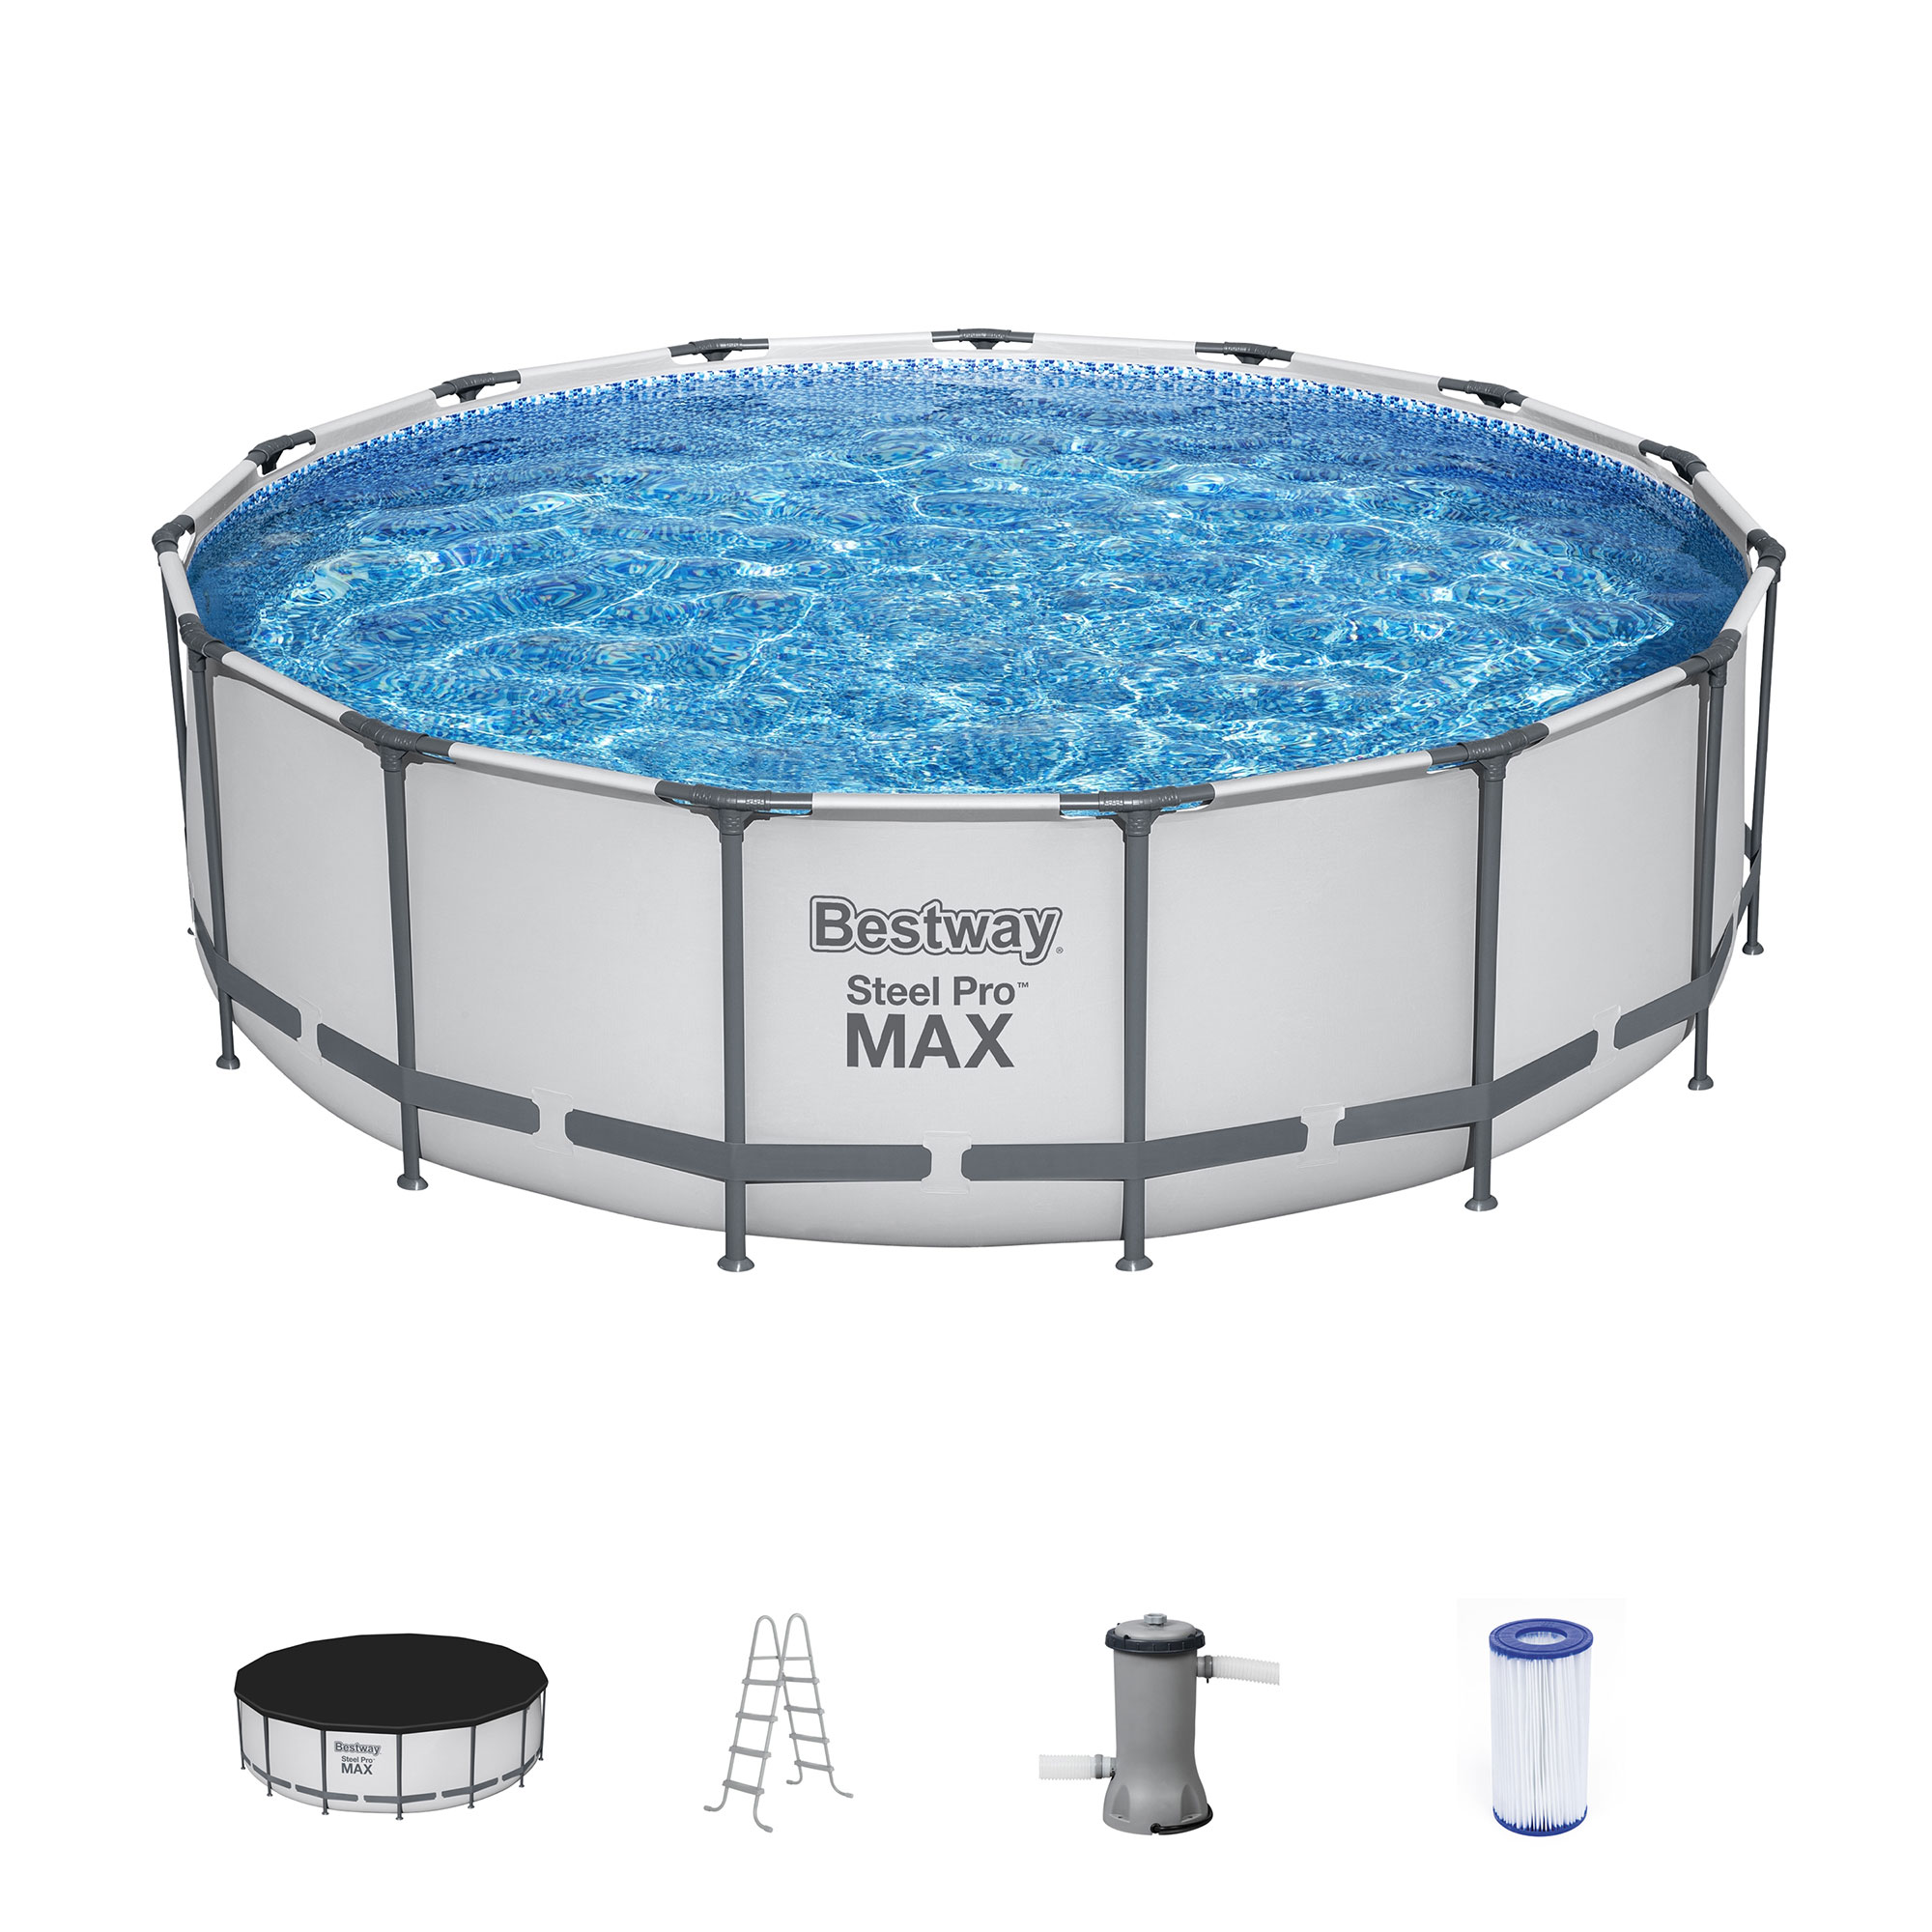 Bestway Steel Pro MAX 15' x 48" Round Above Ground Swimming Pool Set - image 1 of 11